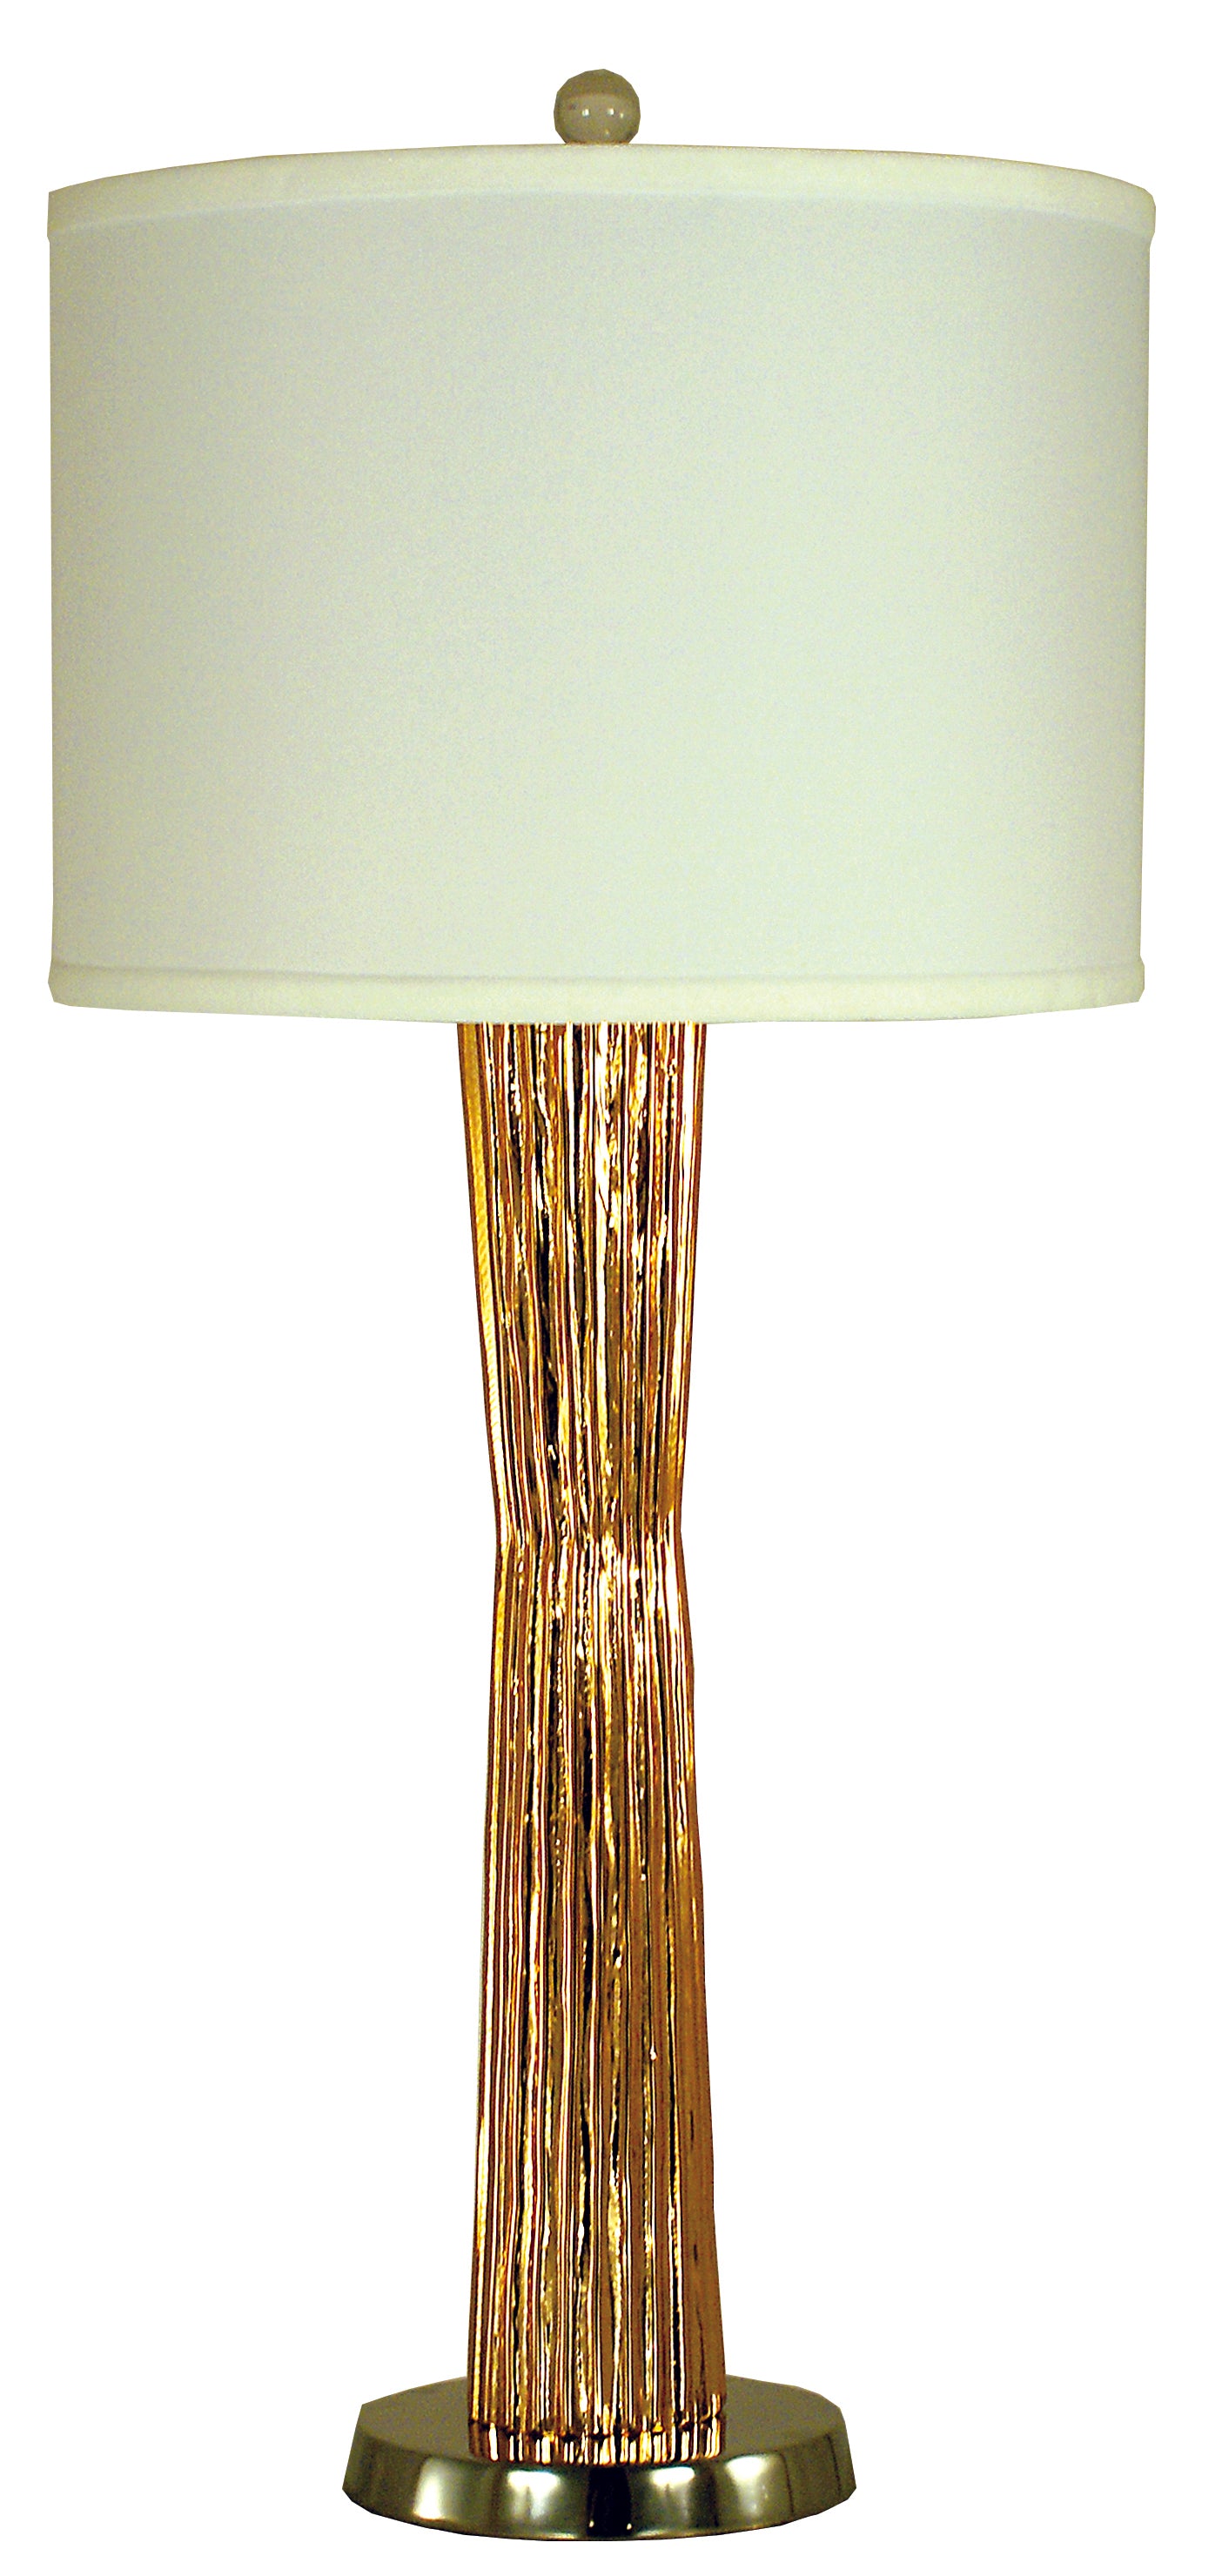 Thumprints Olympia Table Lamp 1254-ASL-2134